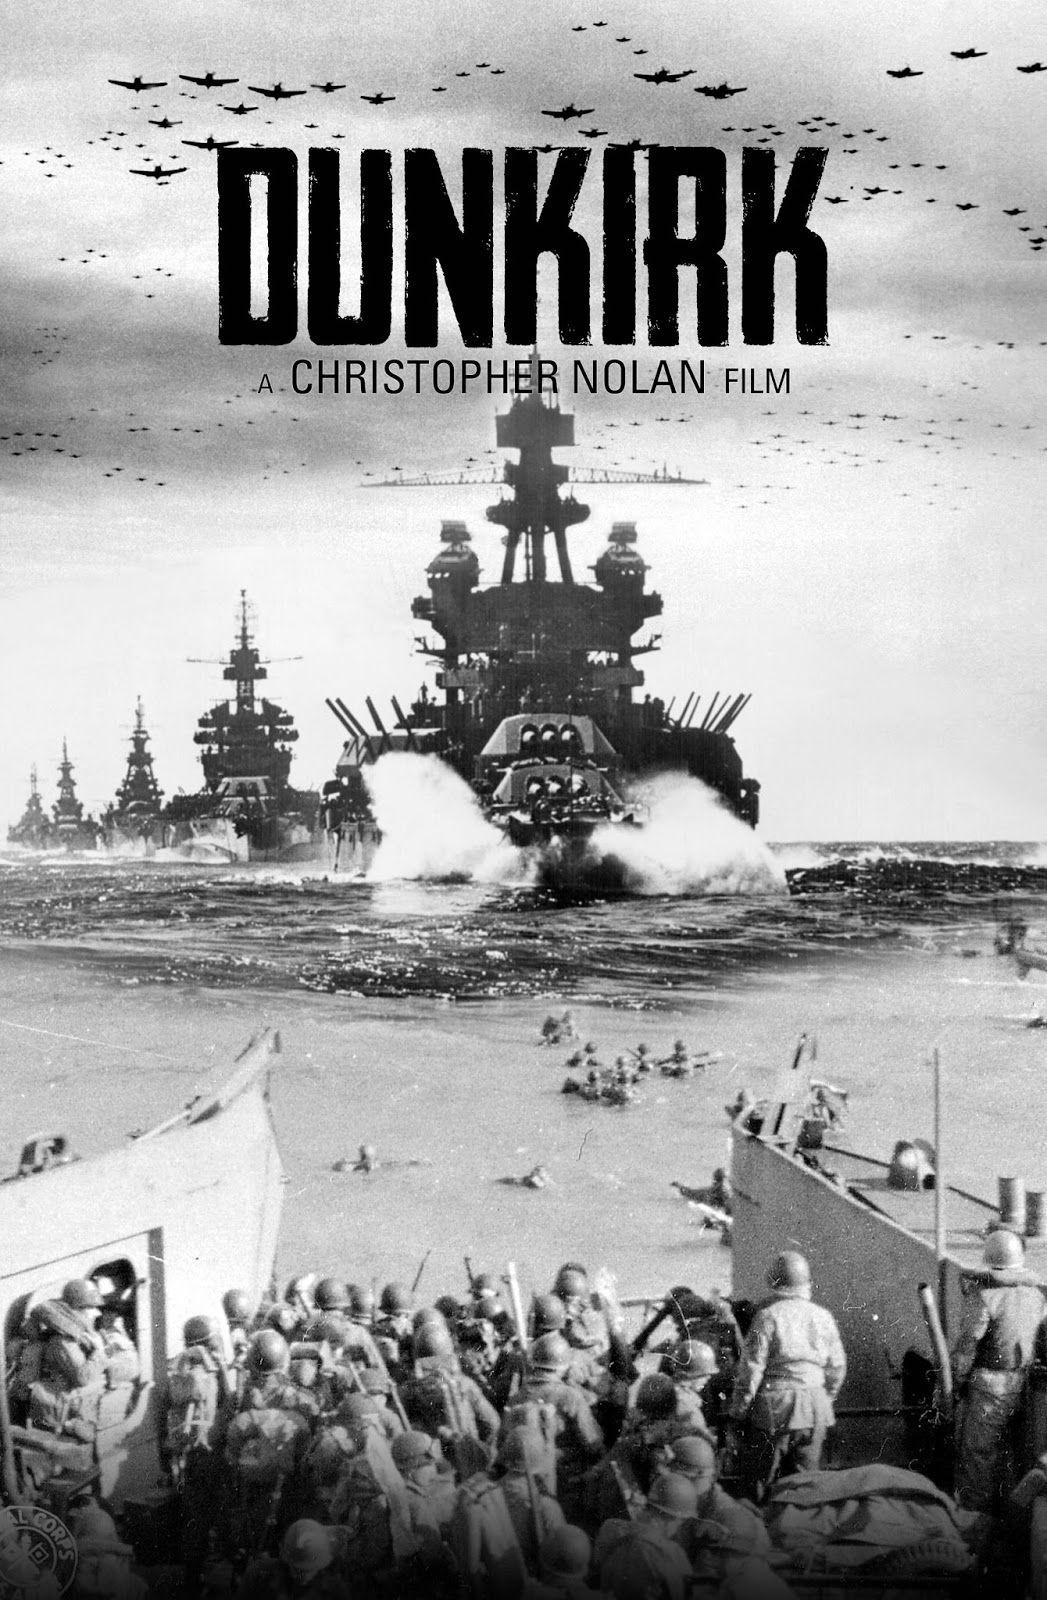 Watch and Download Dunkirk(2017) full movie 1080p. Watch